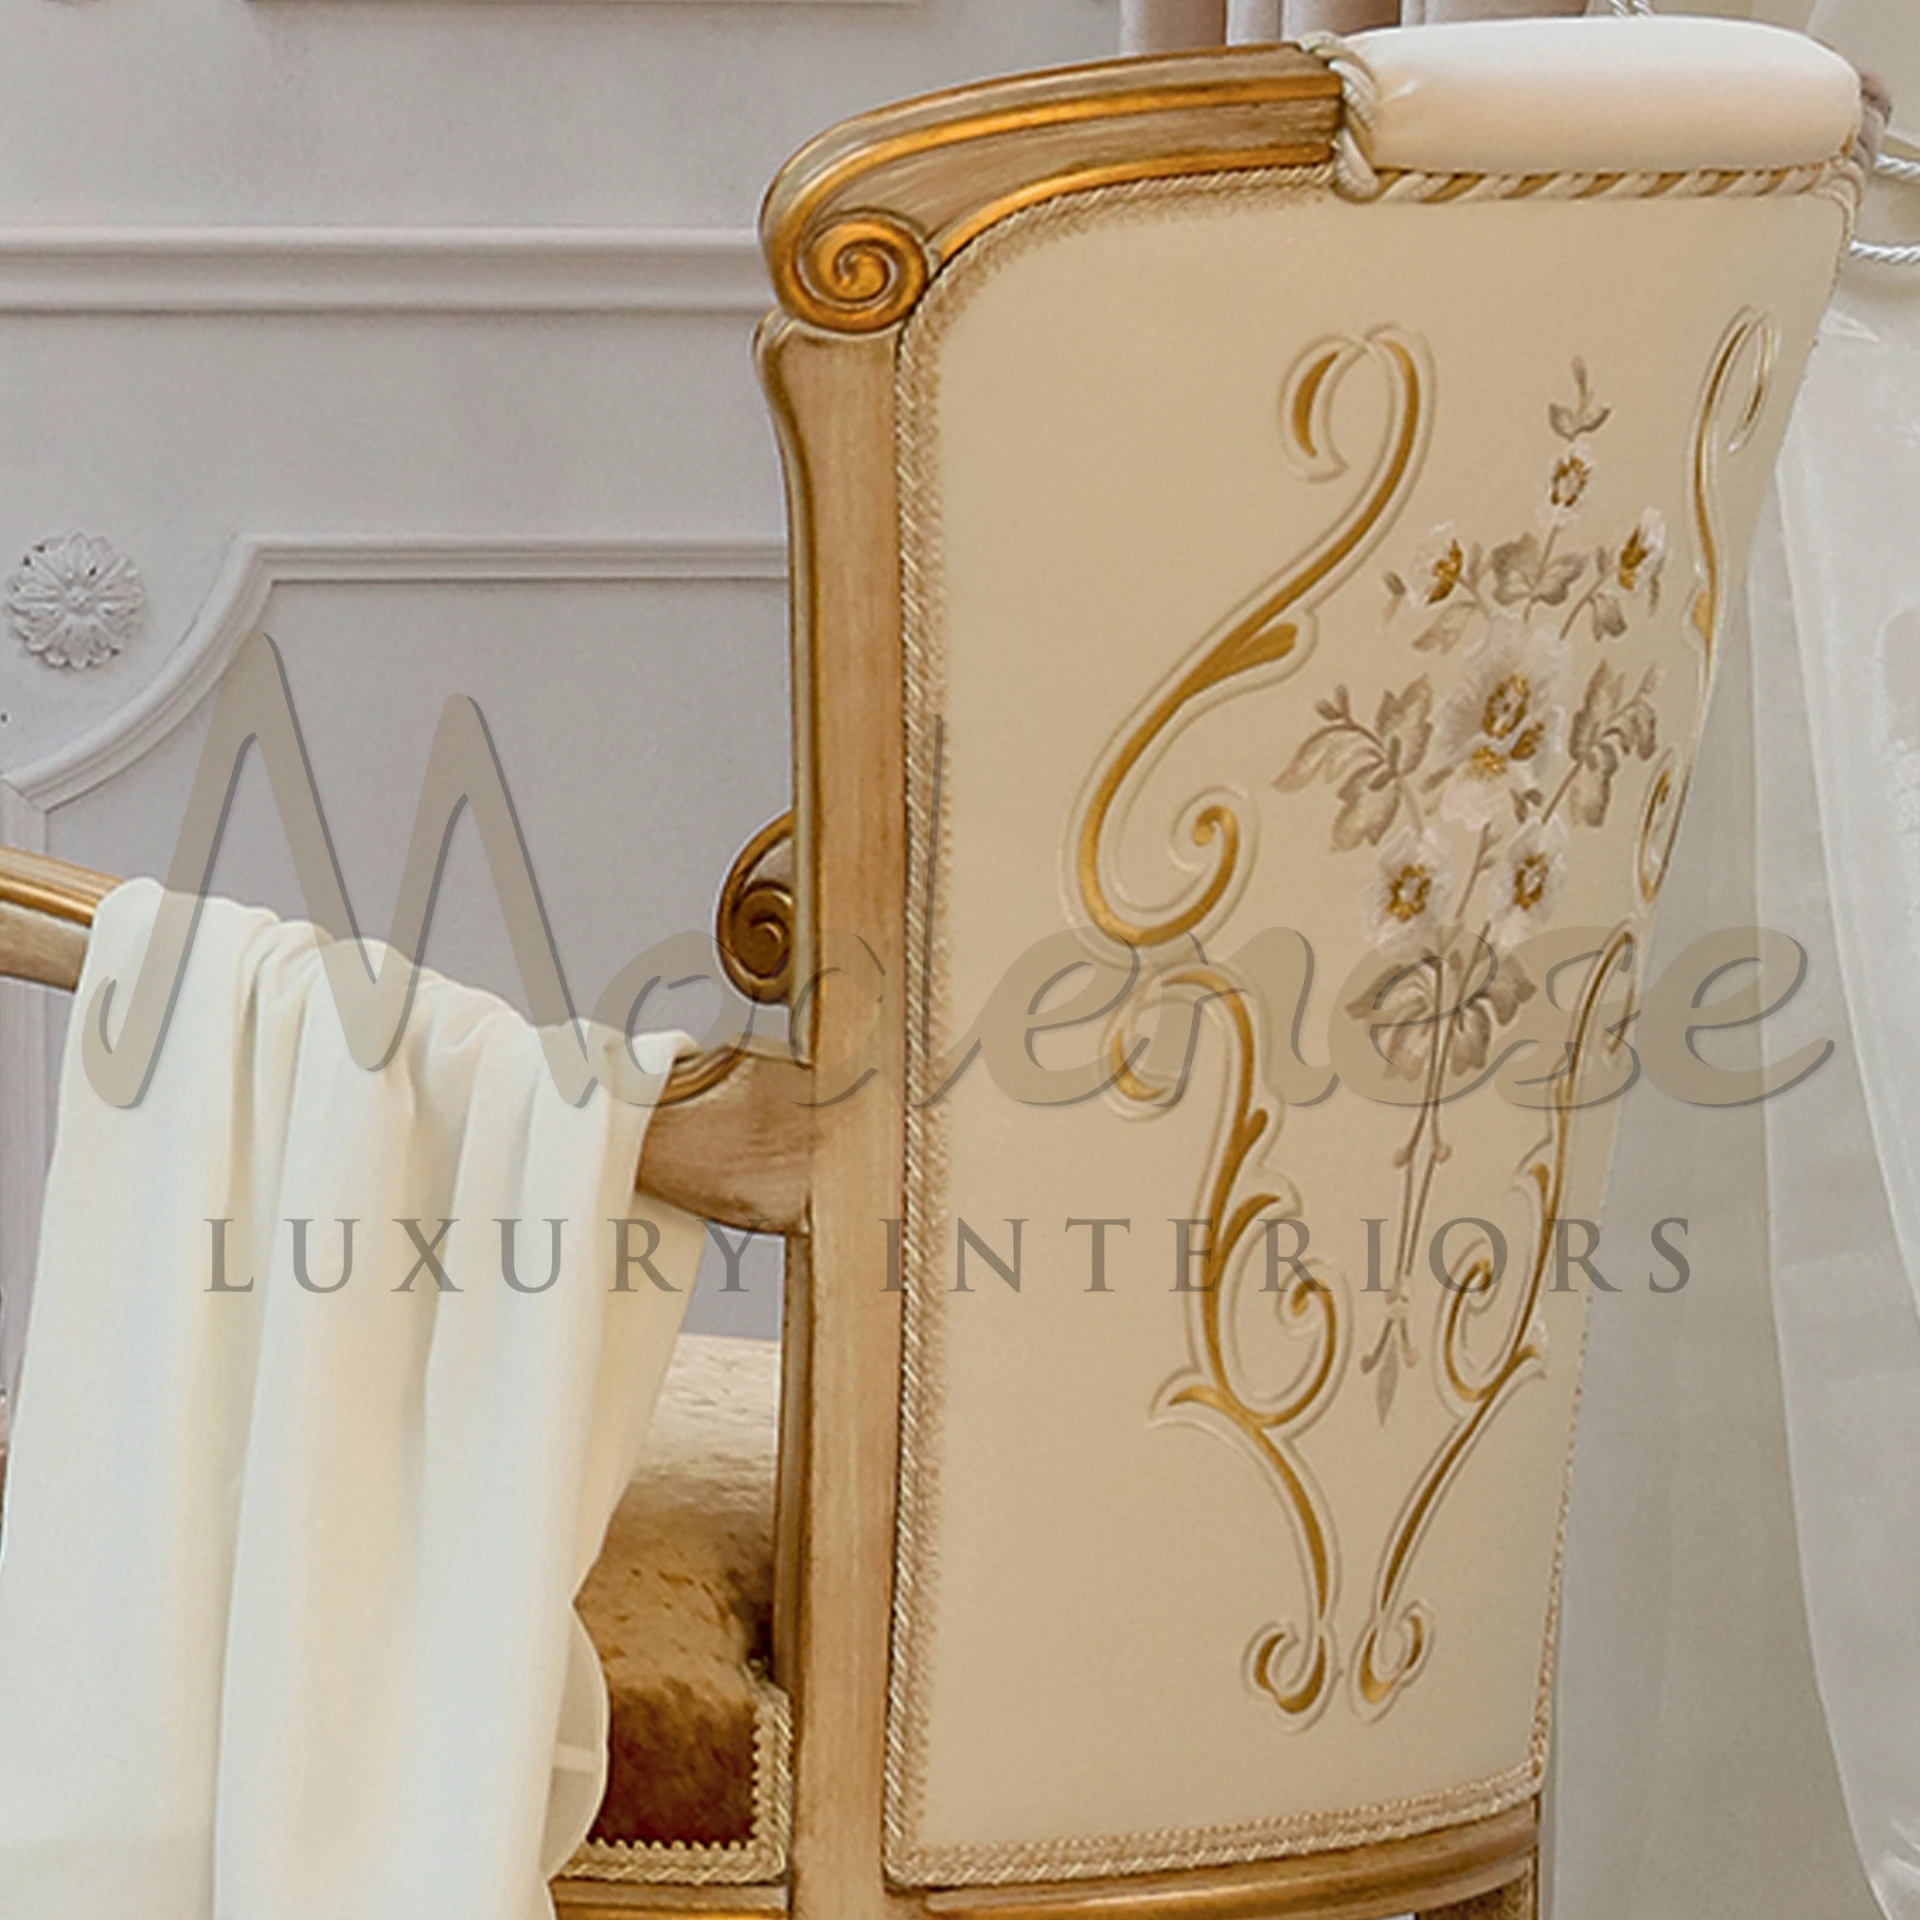 A close up view of the Classic Italian hand carved chair with its unique golden floral design.